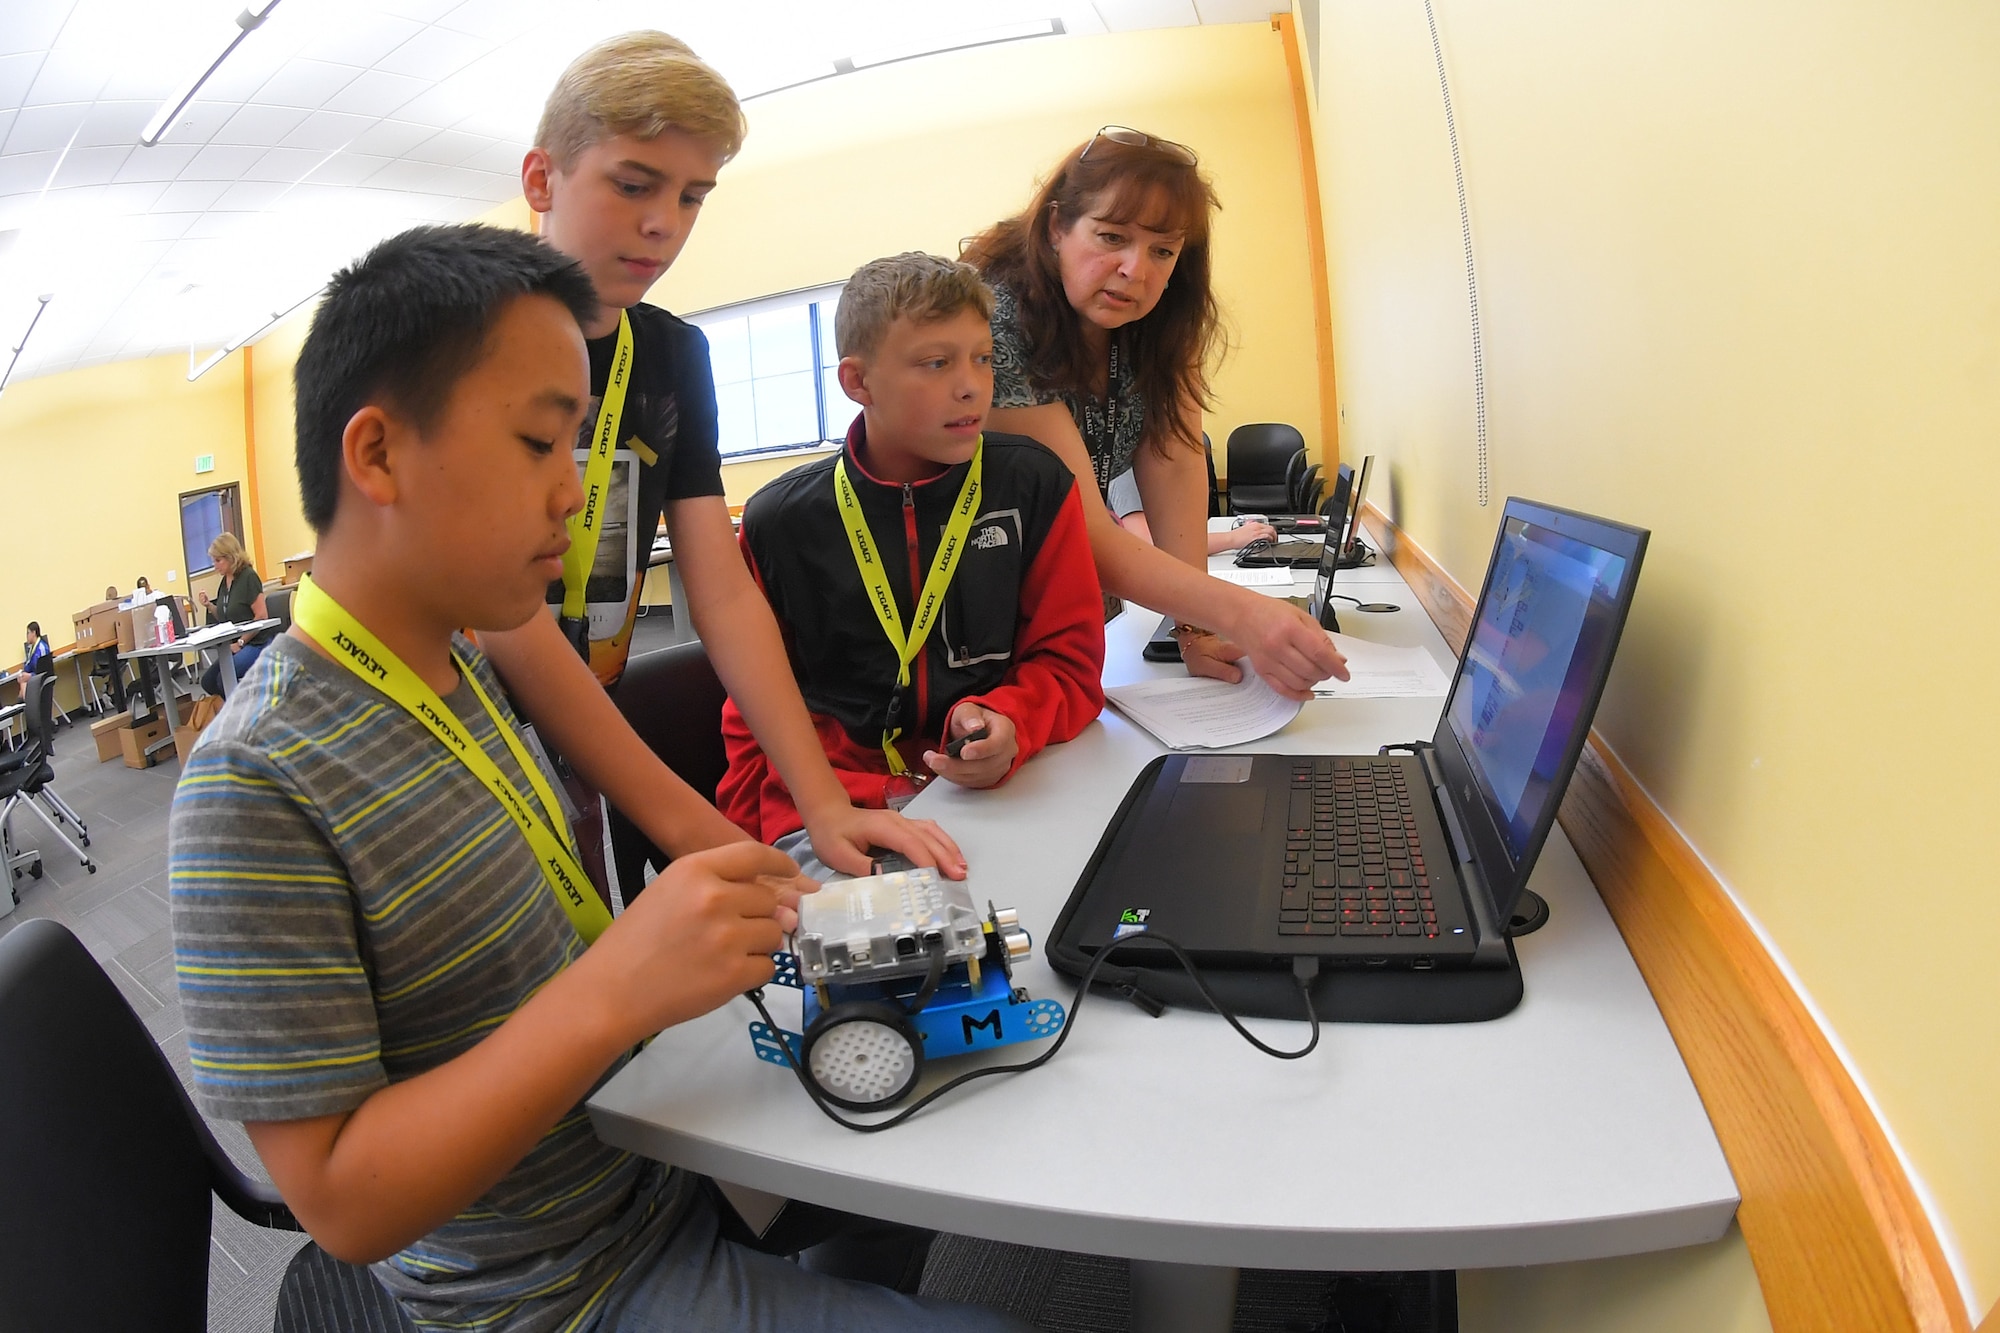 Students write code to program robots with instruction from instructor Patricia Bodley during a LEGACY (Leadership Experience Growing Apprenticeships Committed to Youth) program camp June 26, 2019, at the Freeport Center in Clearfield, Utah. LEGACY is an Air Force program aimed at building interest in science, technology, engineering and math (STEM) through hands-on activities while showing how STEM applies to the world. (U.S. Air Force photo by Todd Cromar)